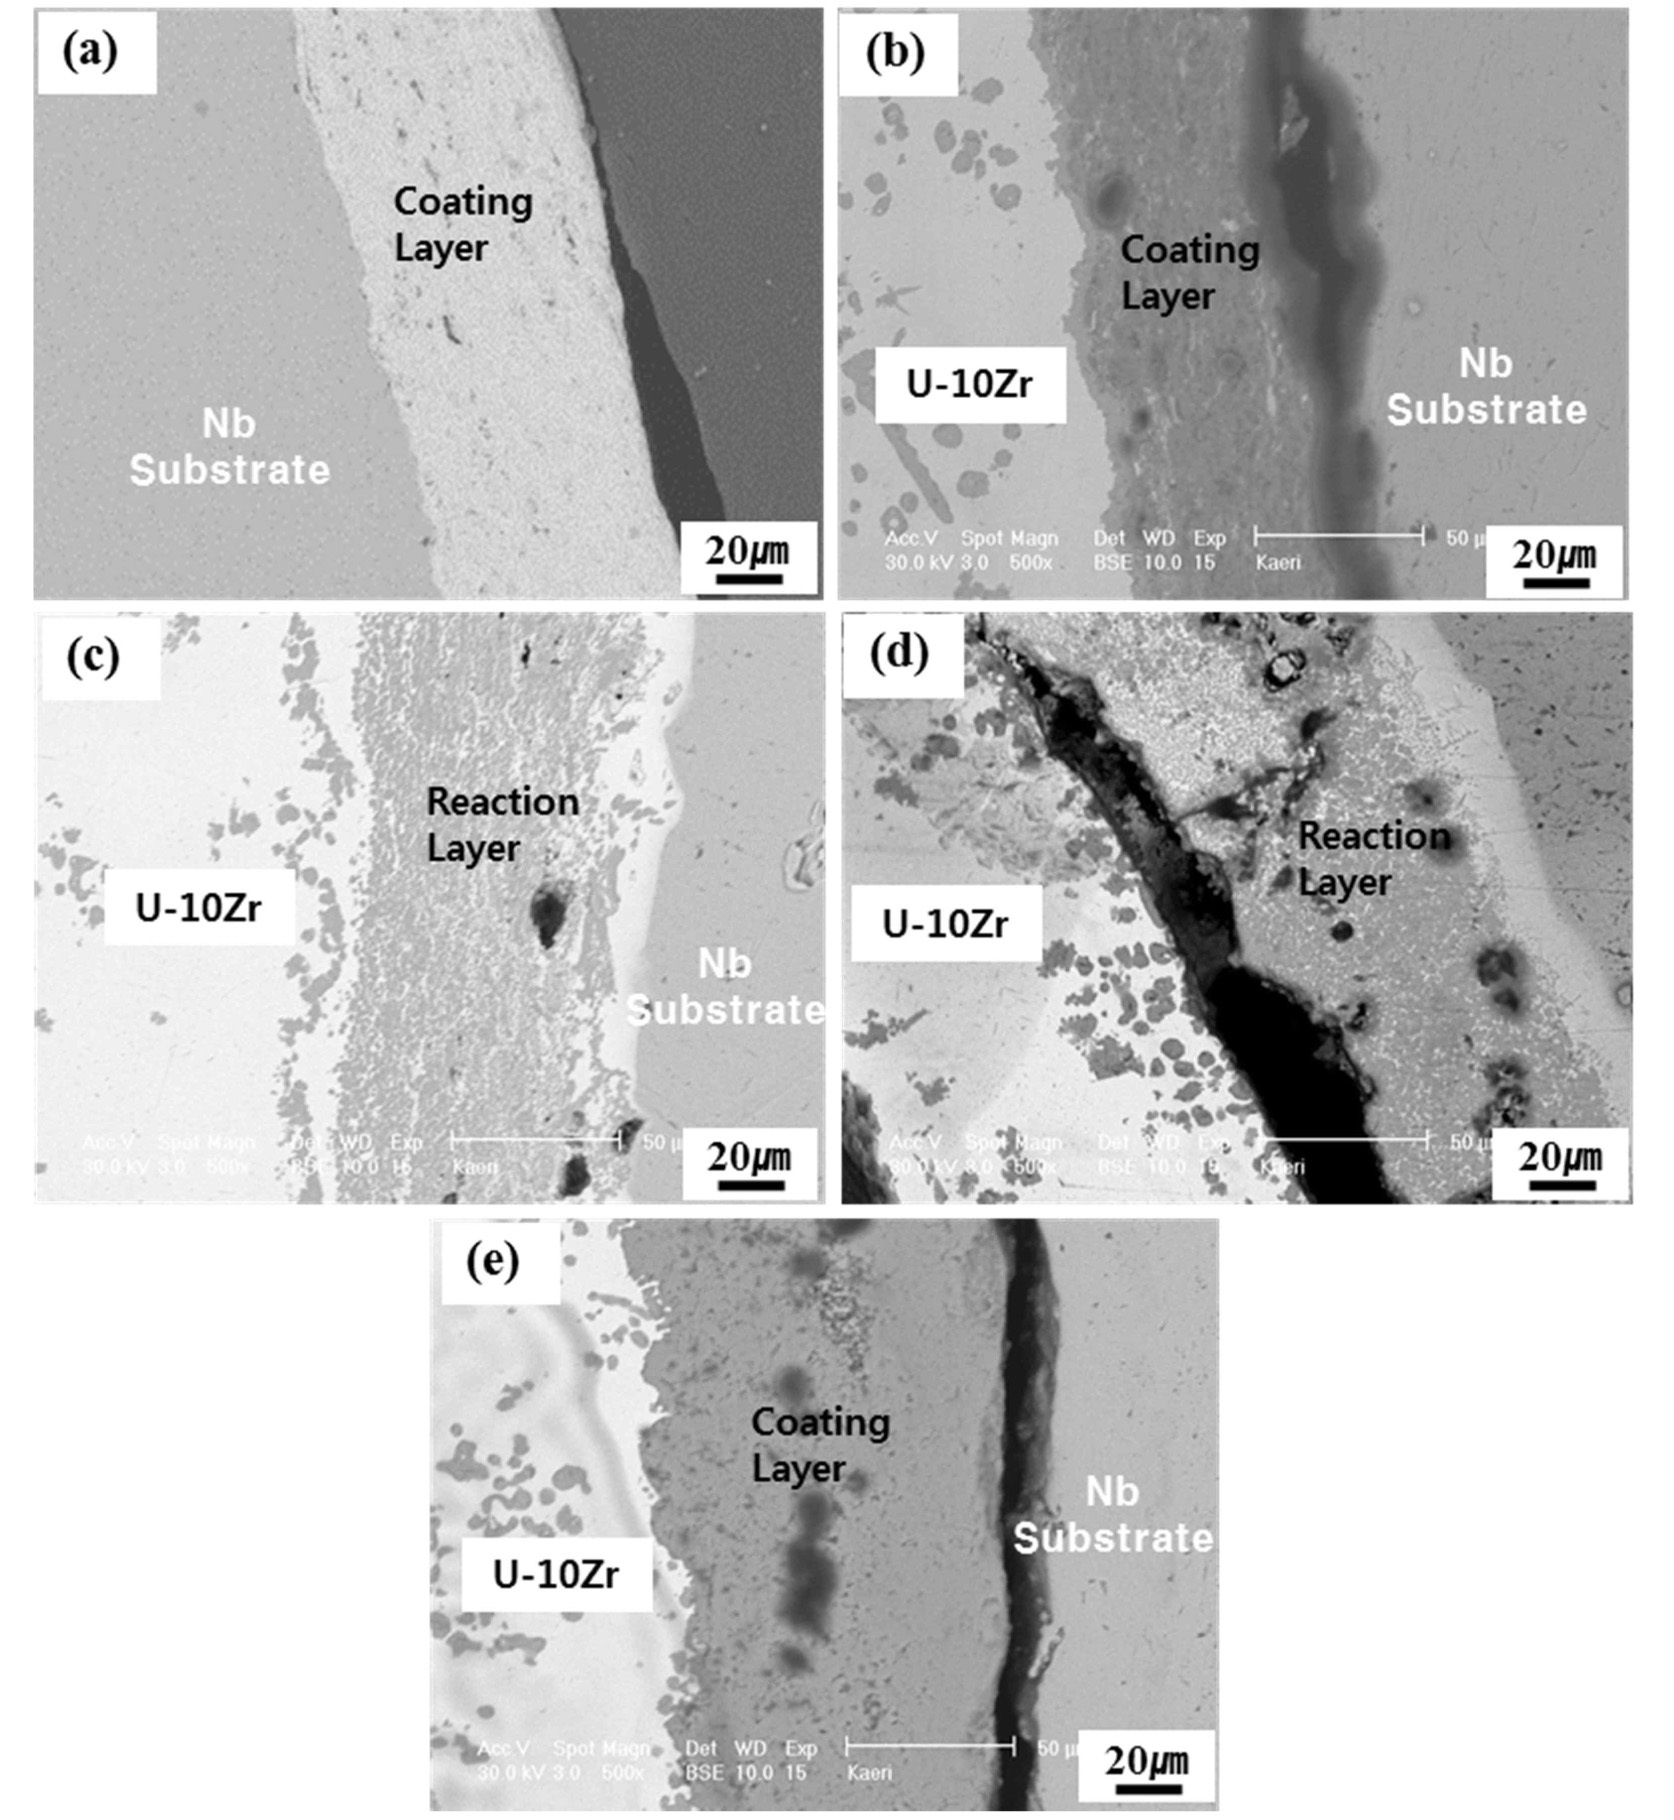 Cross-sectional SEM Micrographs showing the Interface between U-10wt.%Zr and Ceramic Coating Layer on Nb Substrate after Dipping at 1600℃ for 5min. and Cooling in a Separated State from the Melt: (a) TaC, (b) TiC, (c) ZrC, (d) ZrO2, and (e) Y2O3